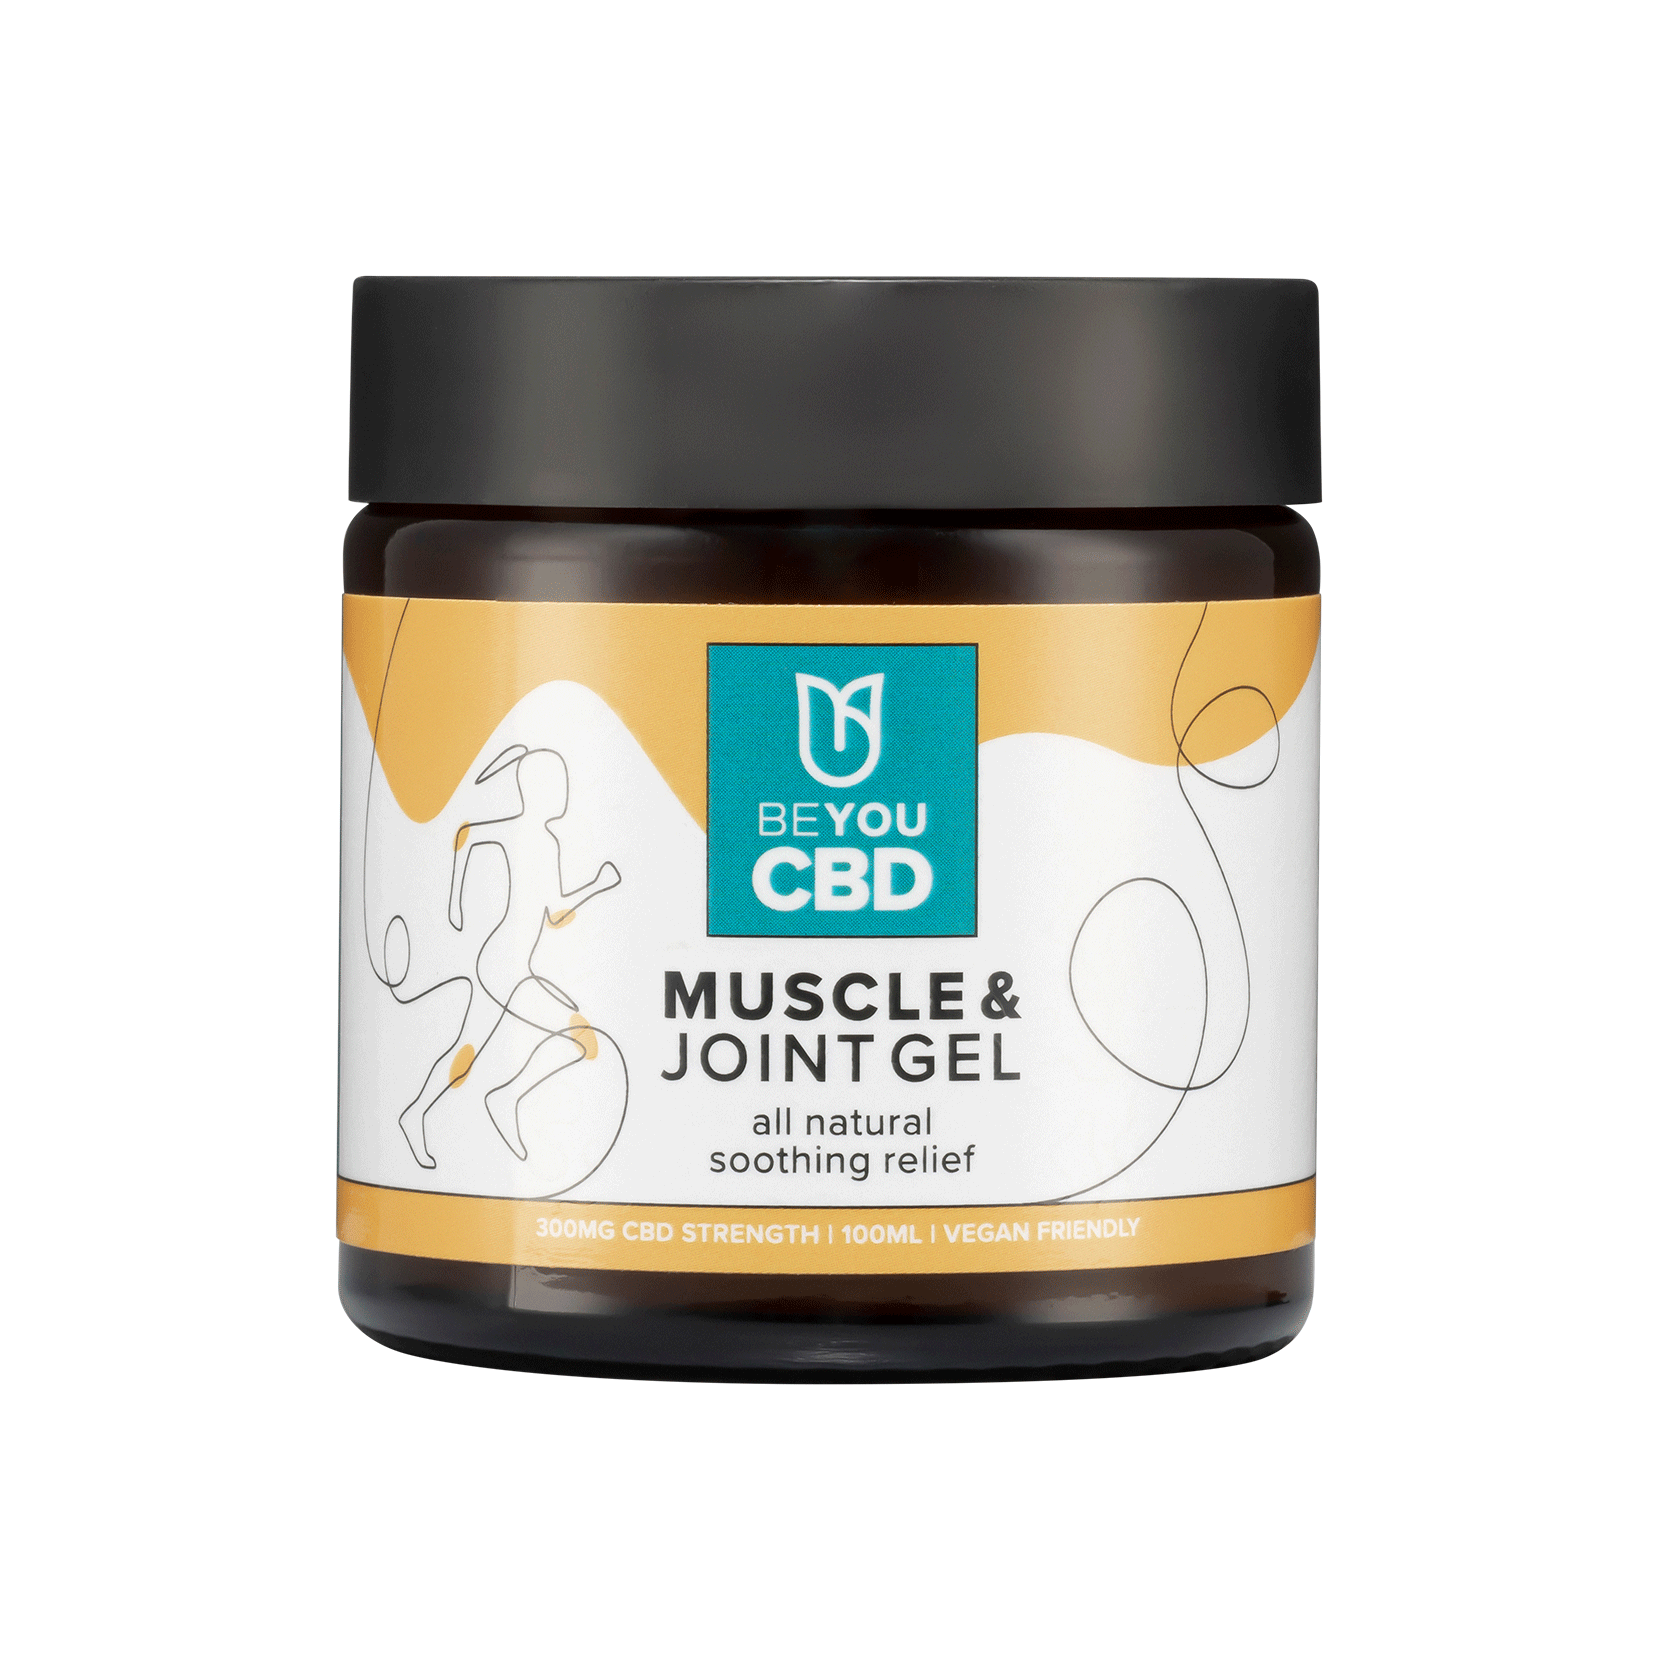 CBD gel for painful muscles and joints for all the CBD benefits in an active gel